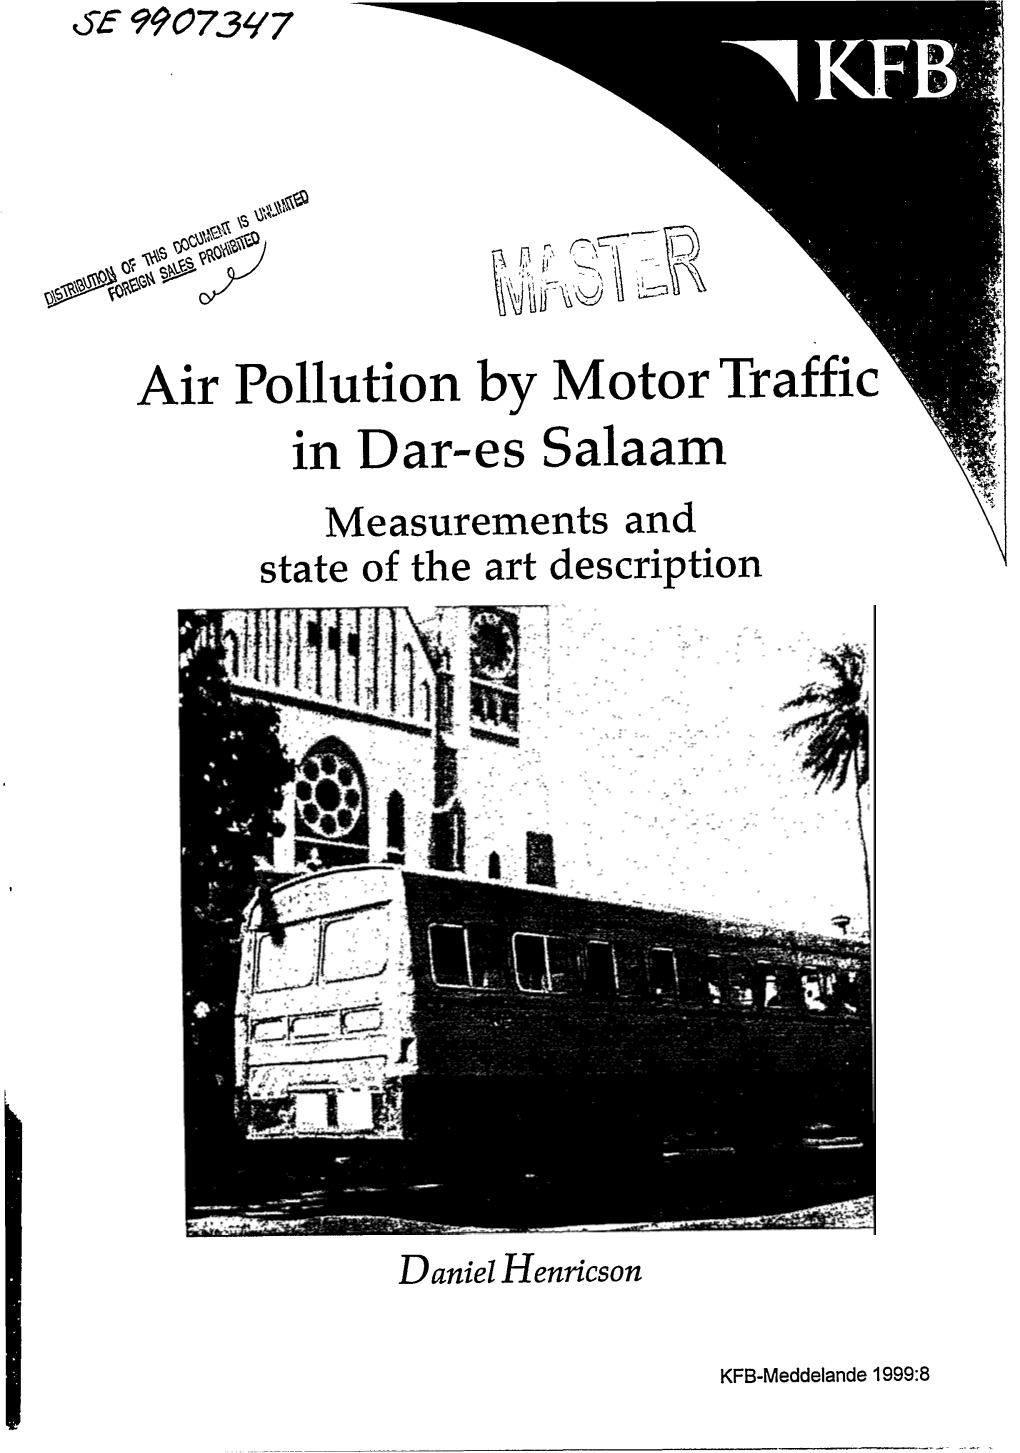 Air Pollution by Motor Traffic in Dar-Es Salaam Measurements and State of the Art Description